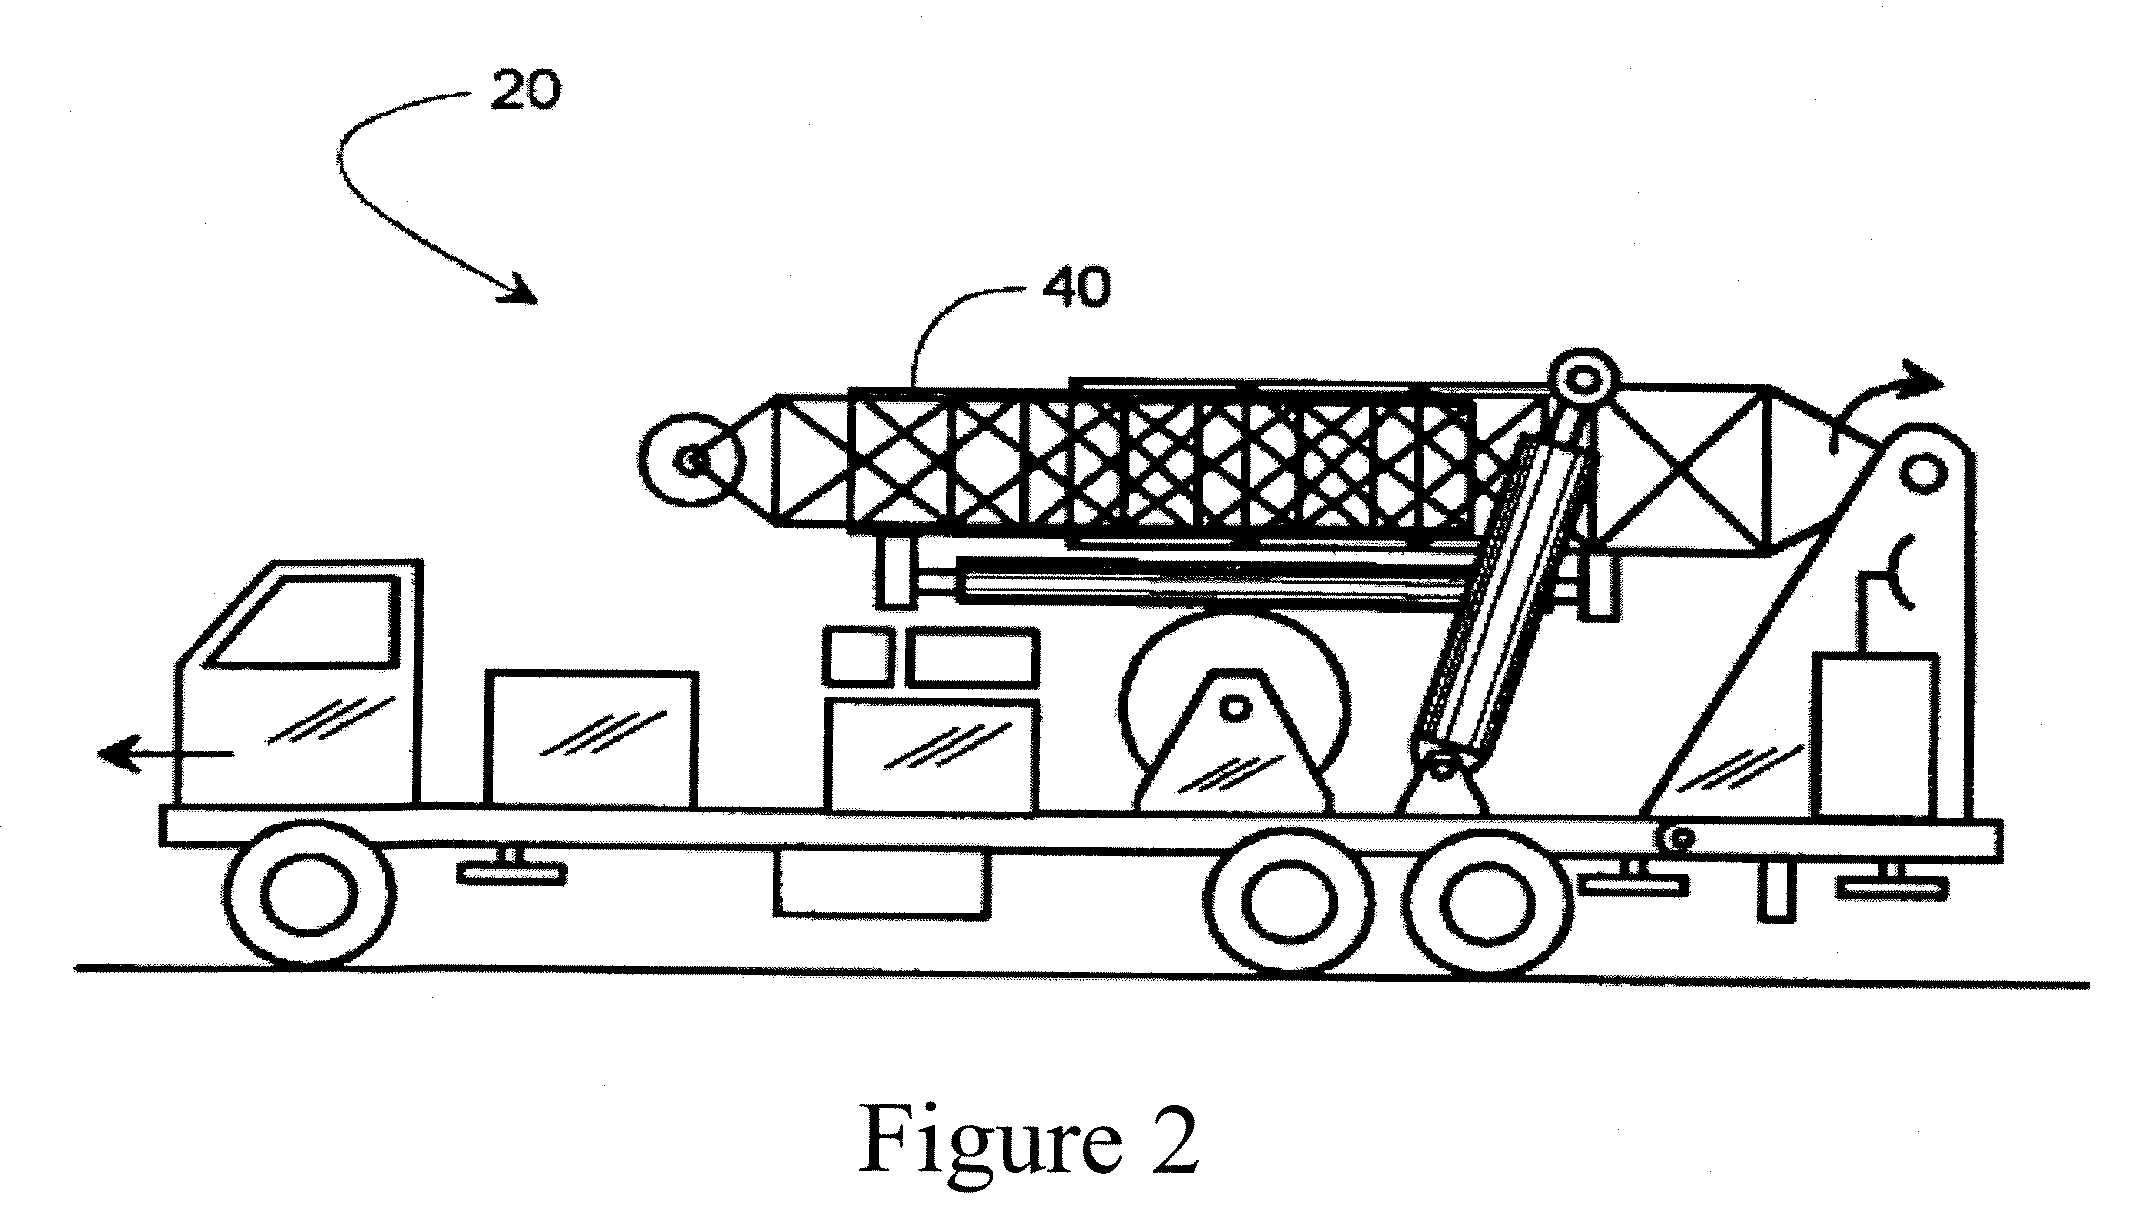 Method and System for Controlling a Well Service Rig Based on Load Data